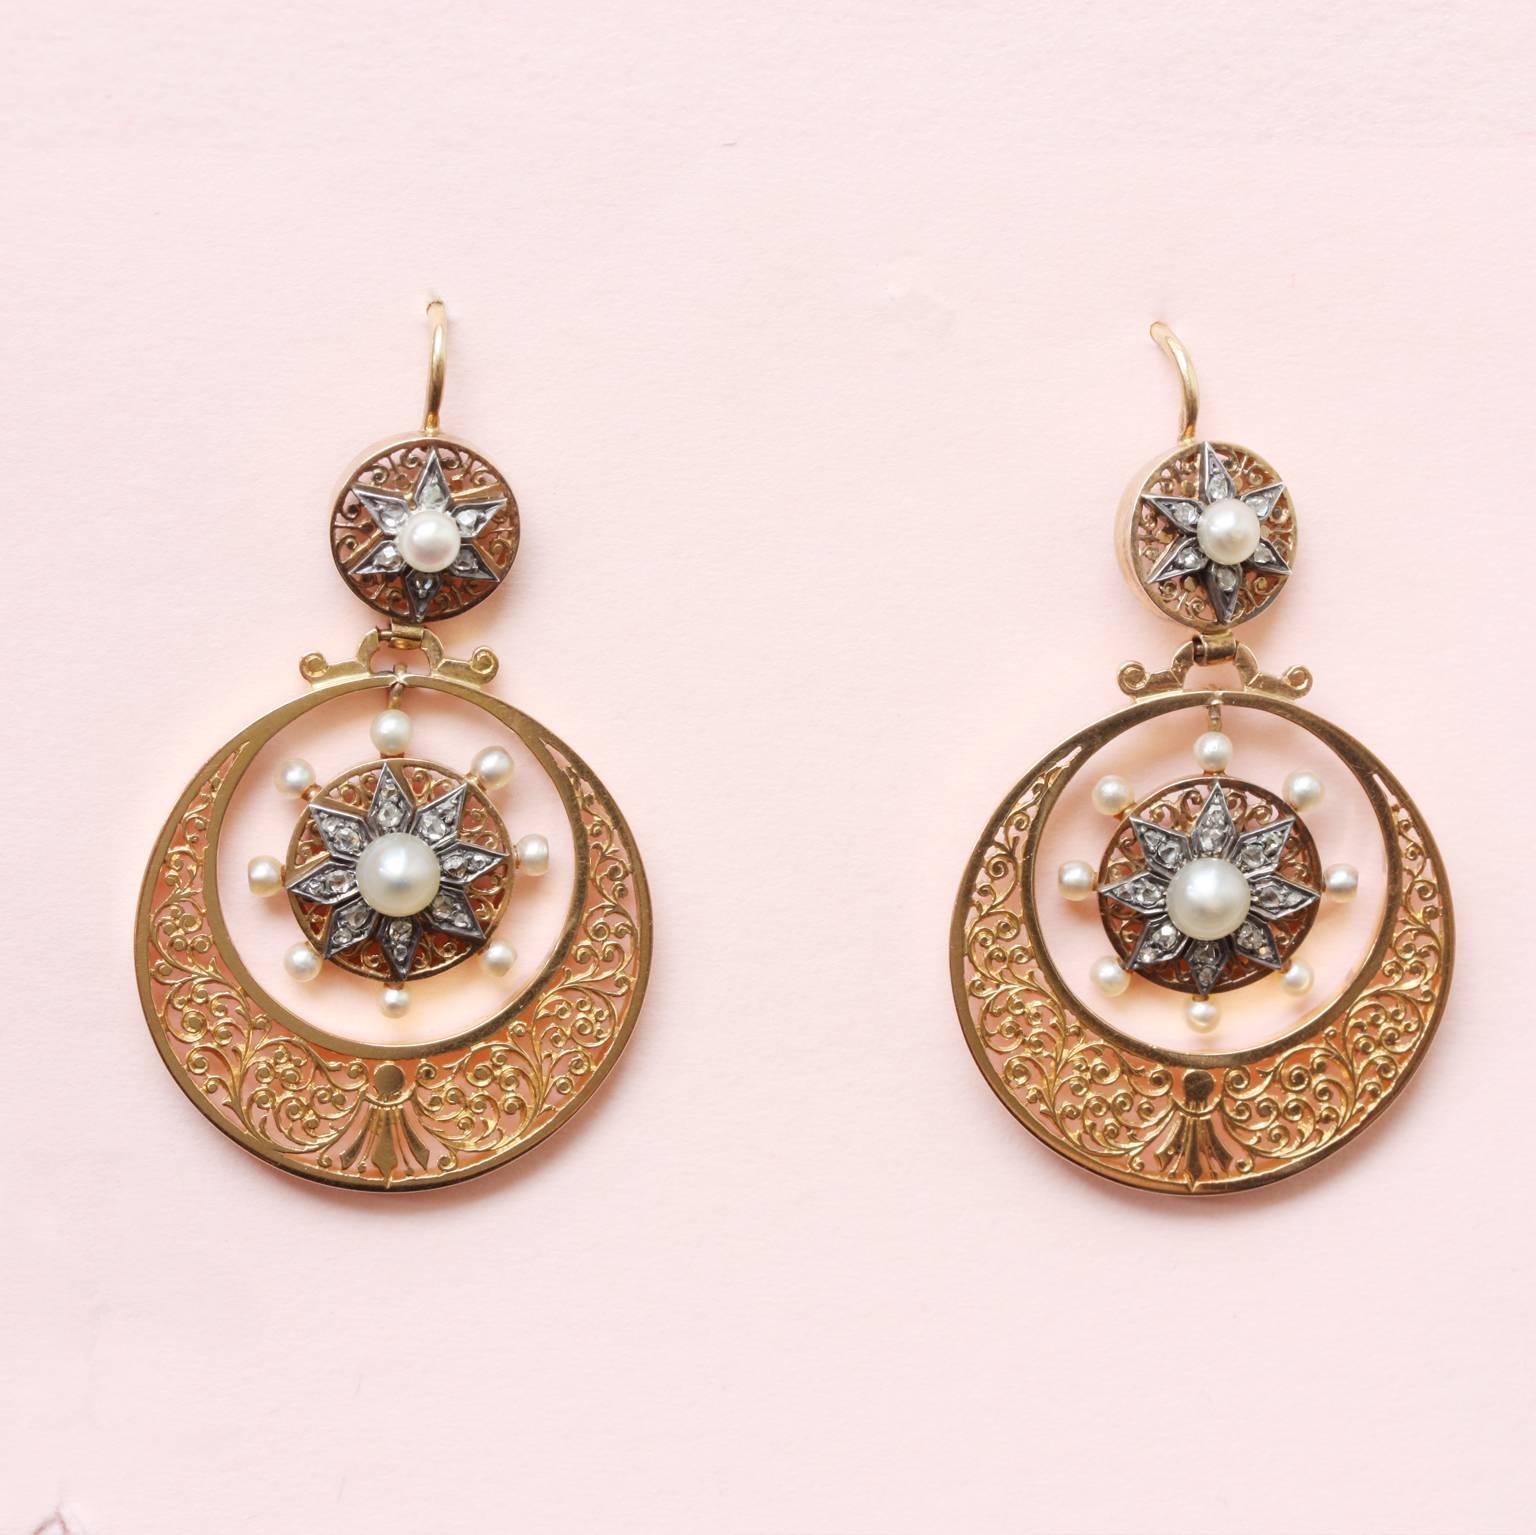 A pair of 18 carat gold circle earrings with a hand engraved foliage decoration, inside a drop with silver stars set with rose cut diamonds  and pearls, with similar tops, France, Savoy, 19th century.

weight: 12 grams
length: 4.5 cm